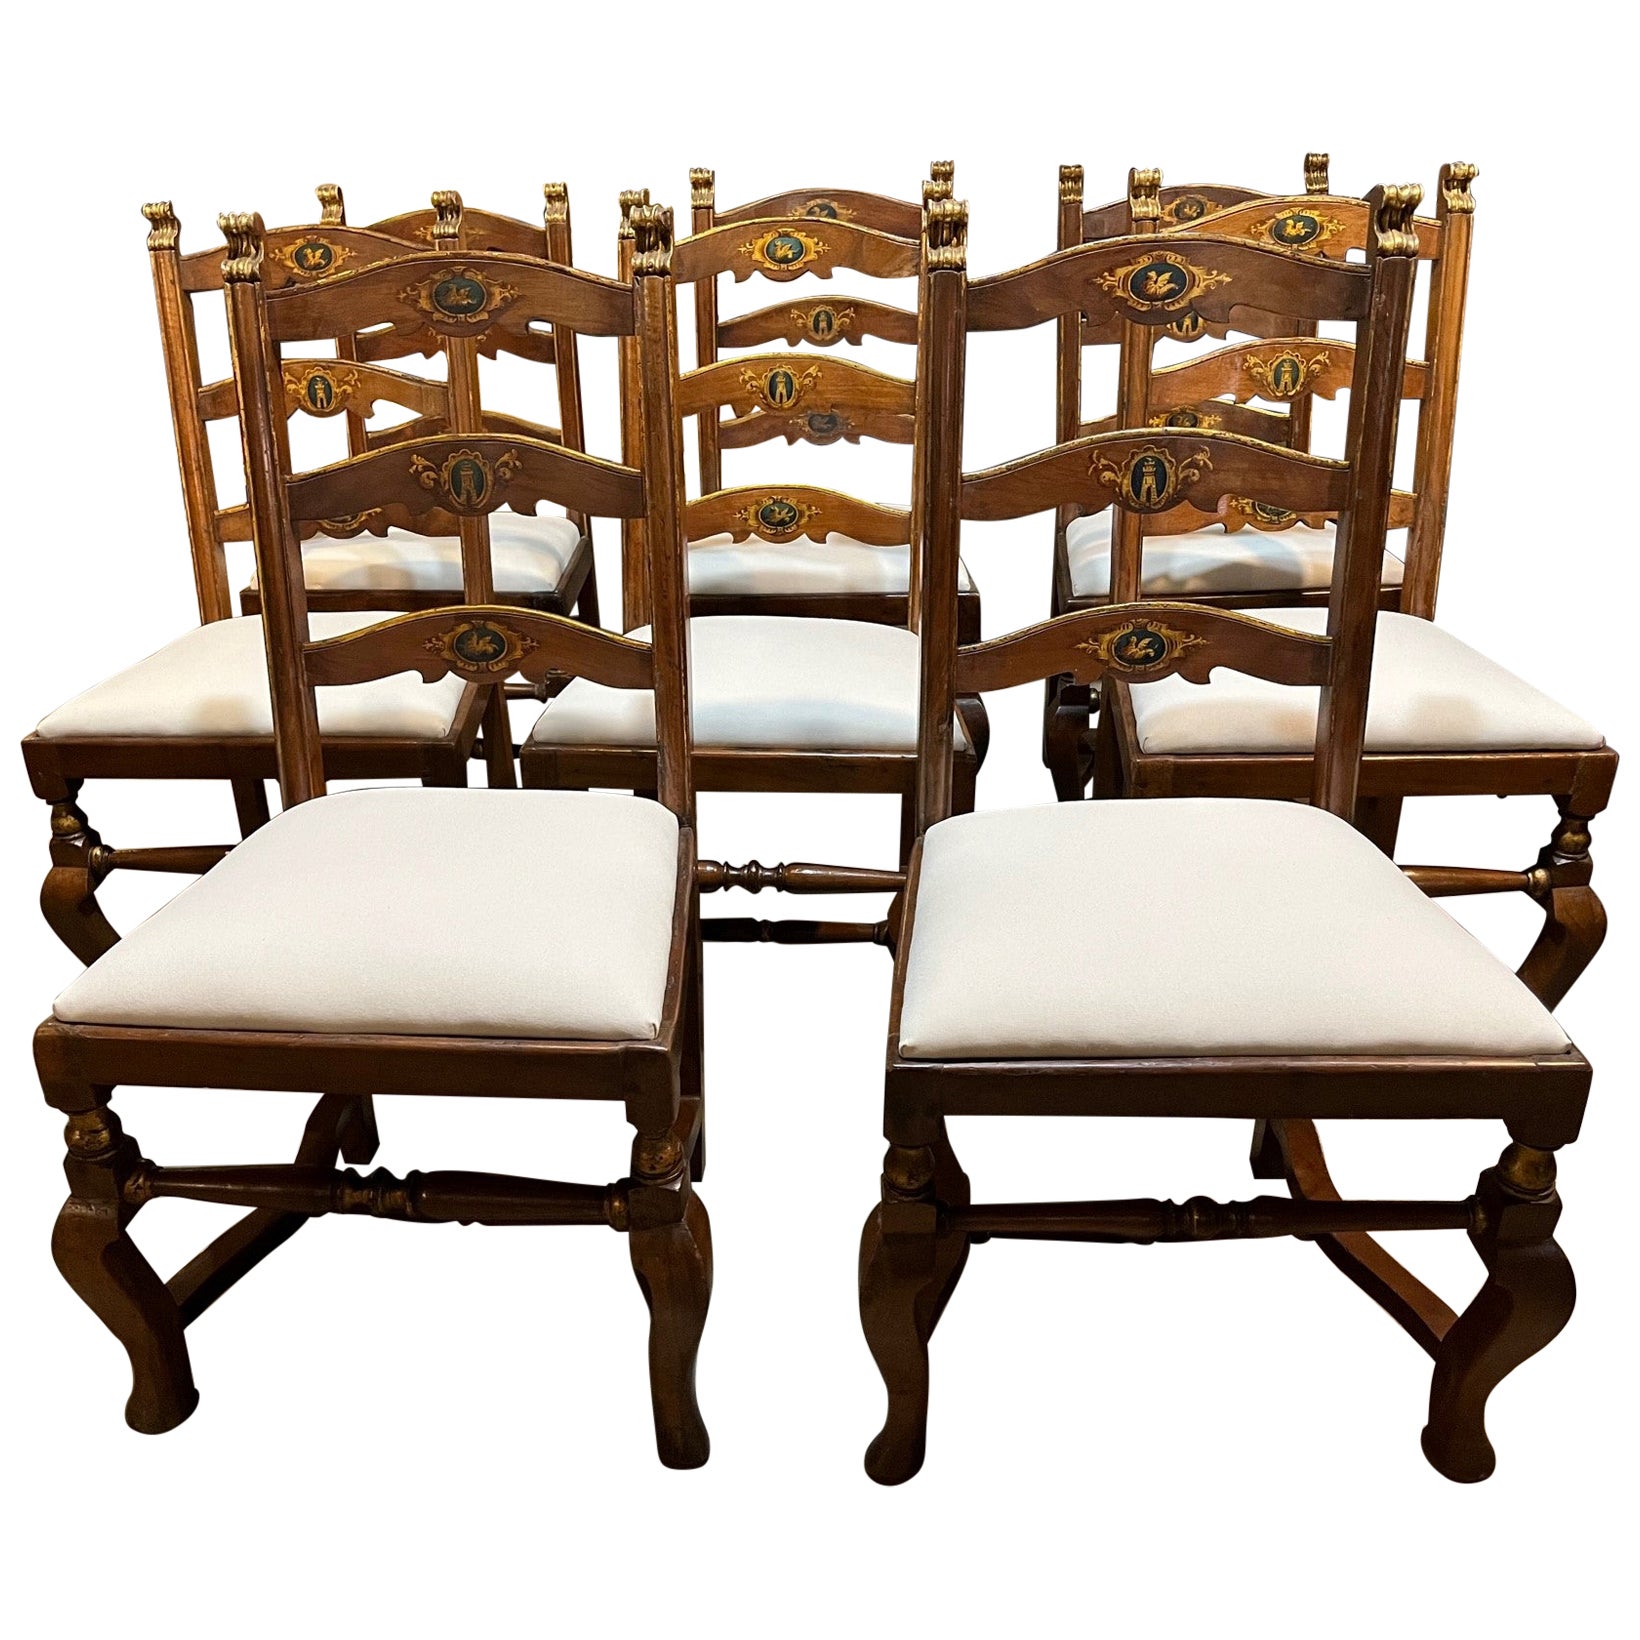 Set Of 8 Early 18th Century Italian Dining Chairs For Sale